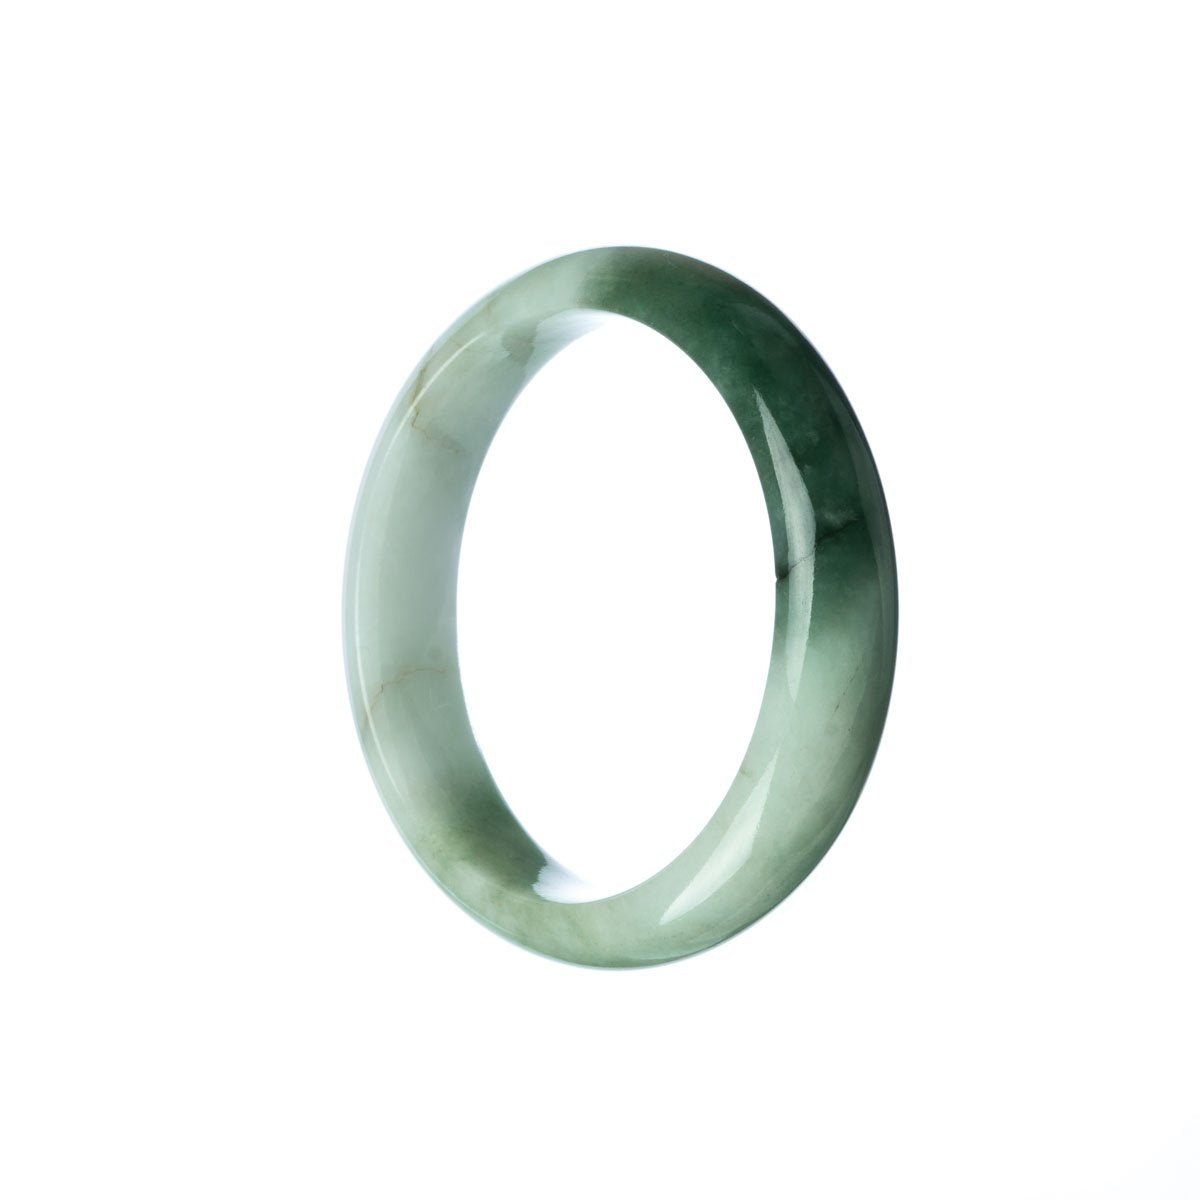 A half moon shaped, child-sized jade bangle bracelet made from authentic Grade A pale green Burmese jade.